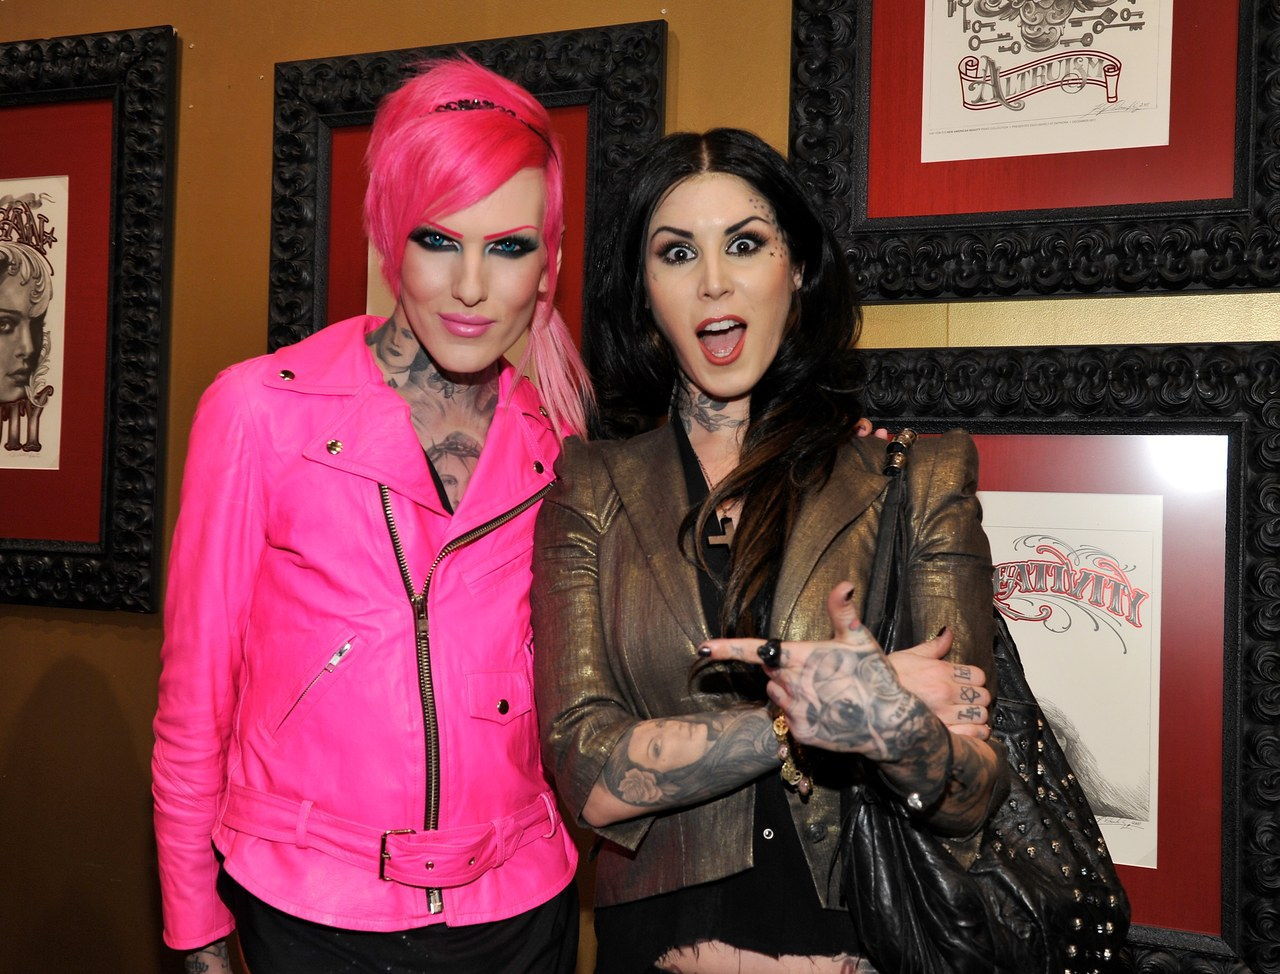 OESTE HOLLYWOOD, CA - FEBRUARY 02: Jeffree Star and Kat Von D attends Sephora's VIP preview party for Kat Von D's New American Beauty art show at Wonderland Gallery on February 2, 2012 in West Hollywood, California. (Photo by John Sciulli/Getty Images For Sephora)